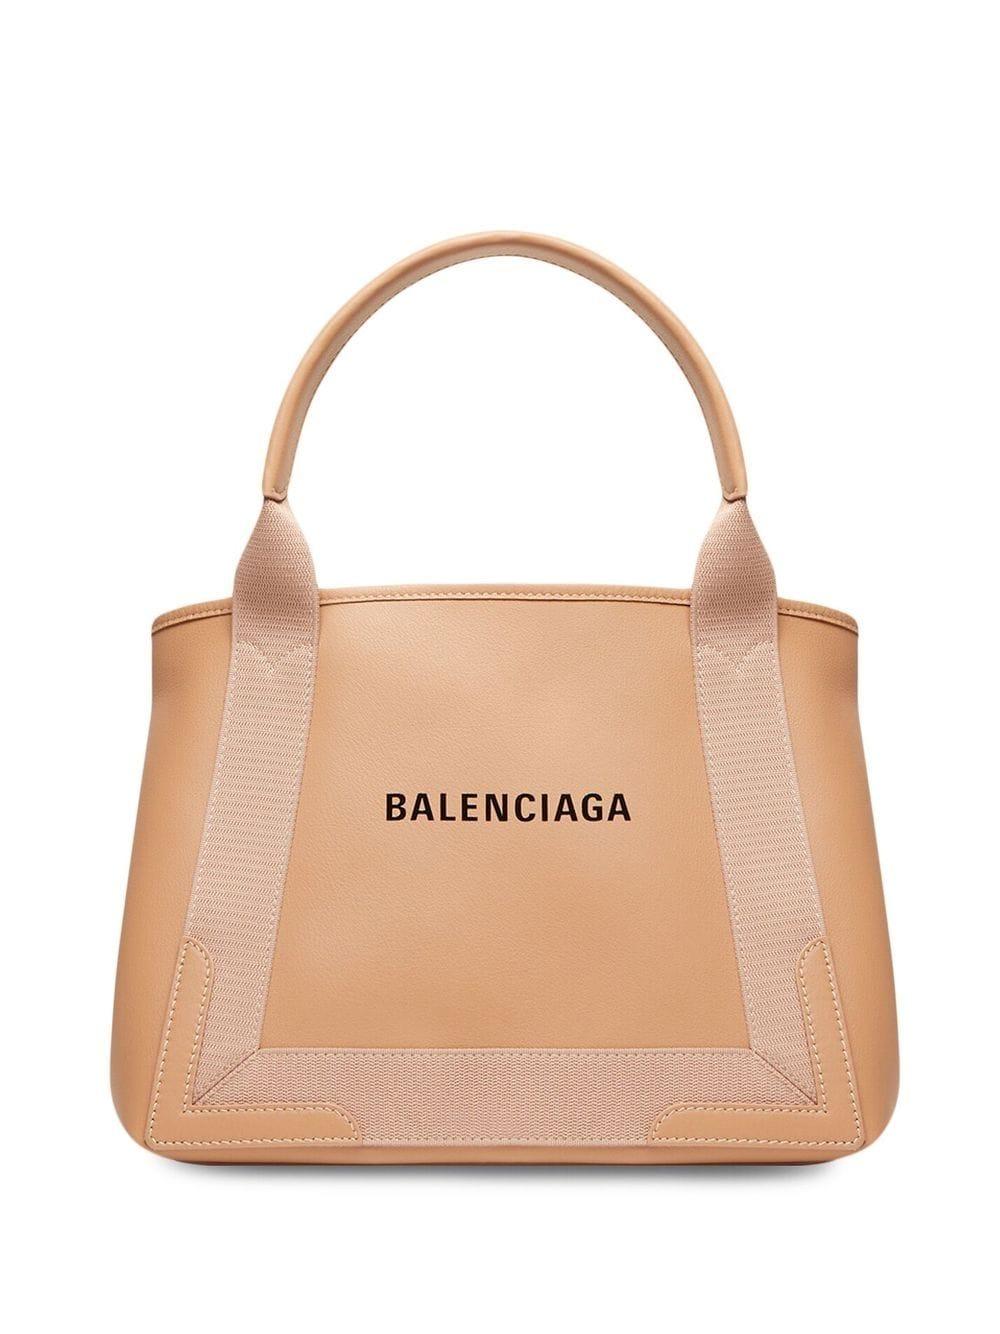 Balenciaga Cabas Leather Tote Bag in Natural | Lyst